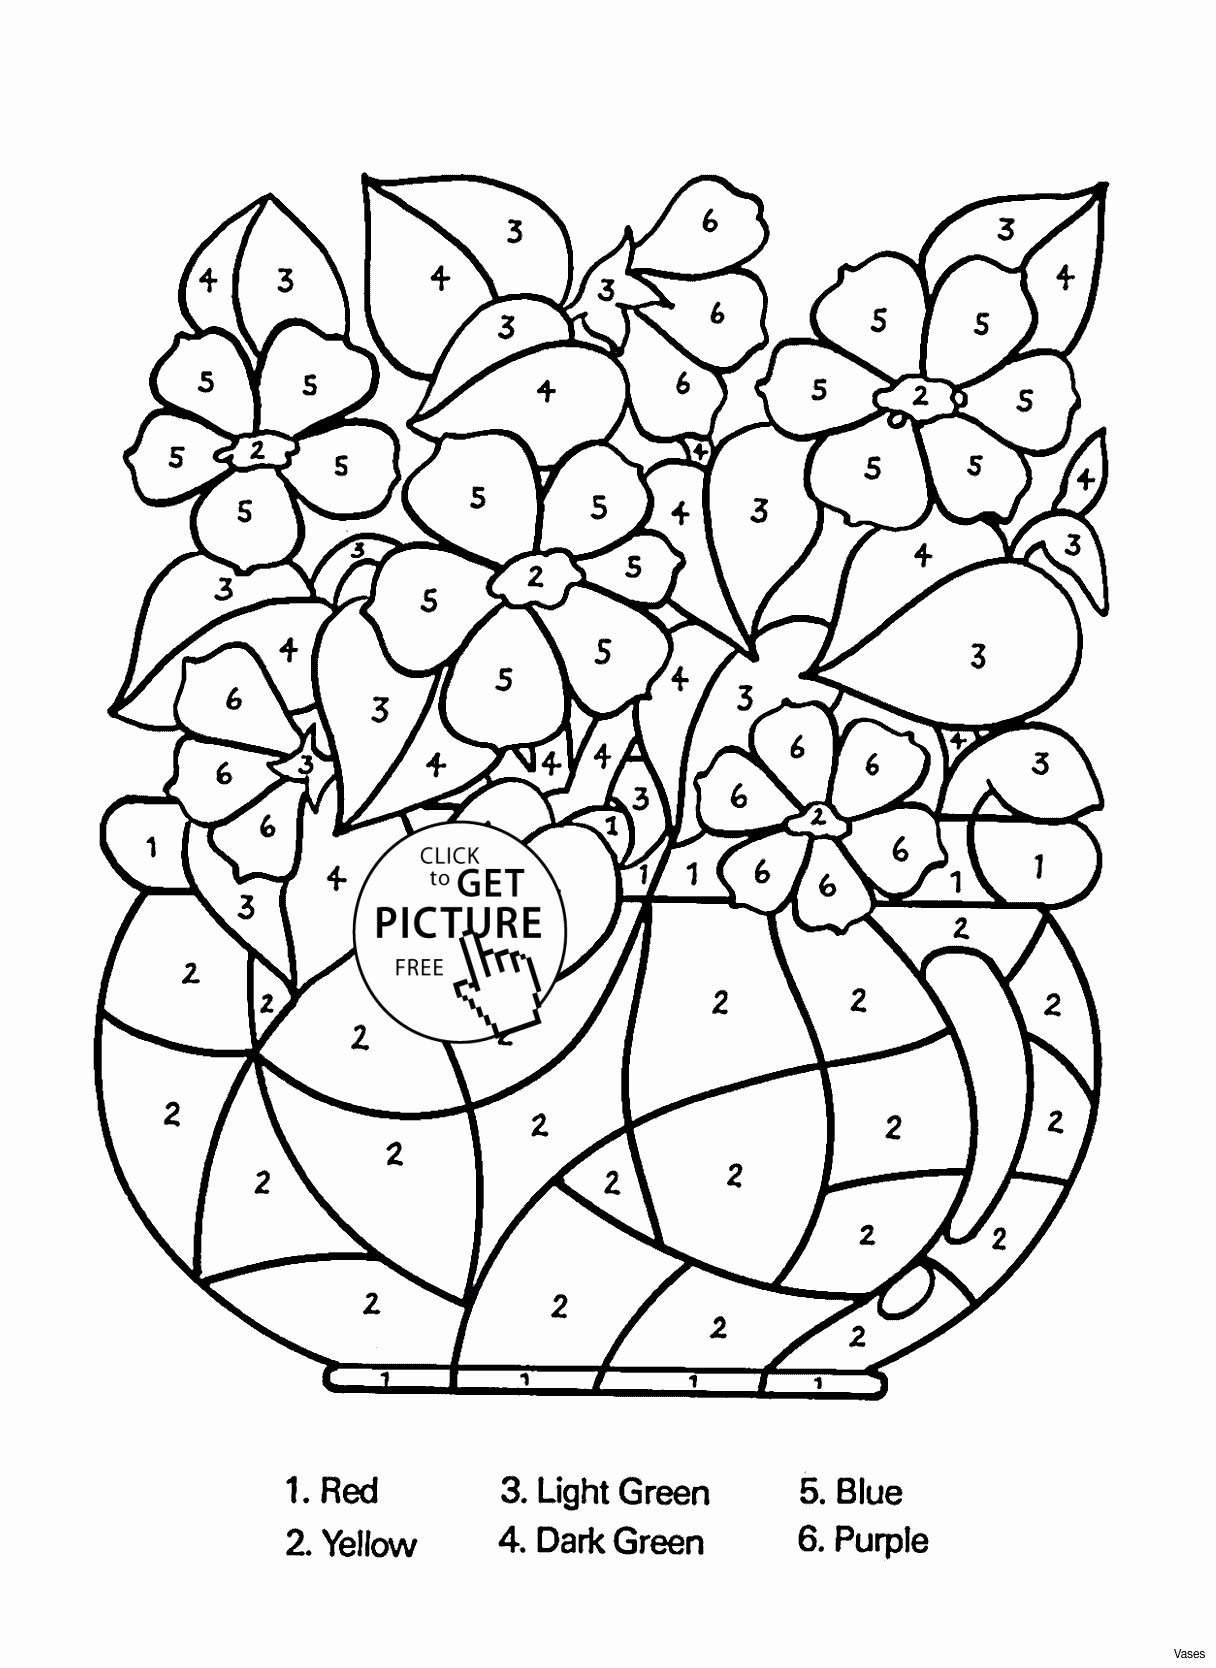 large white ceramic vase of large white vase gallery white floor vase ceramic modern 40 inchl pertaining to large white vase pictures vases flower vase coloring page pages flowers in a top i 0d